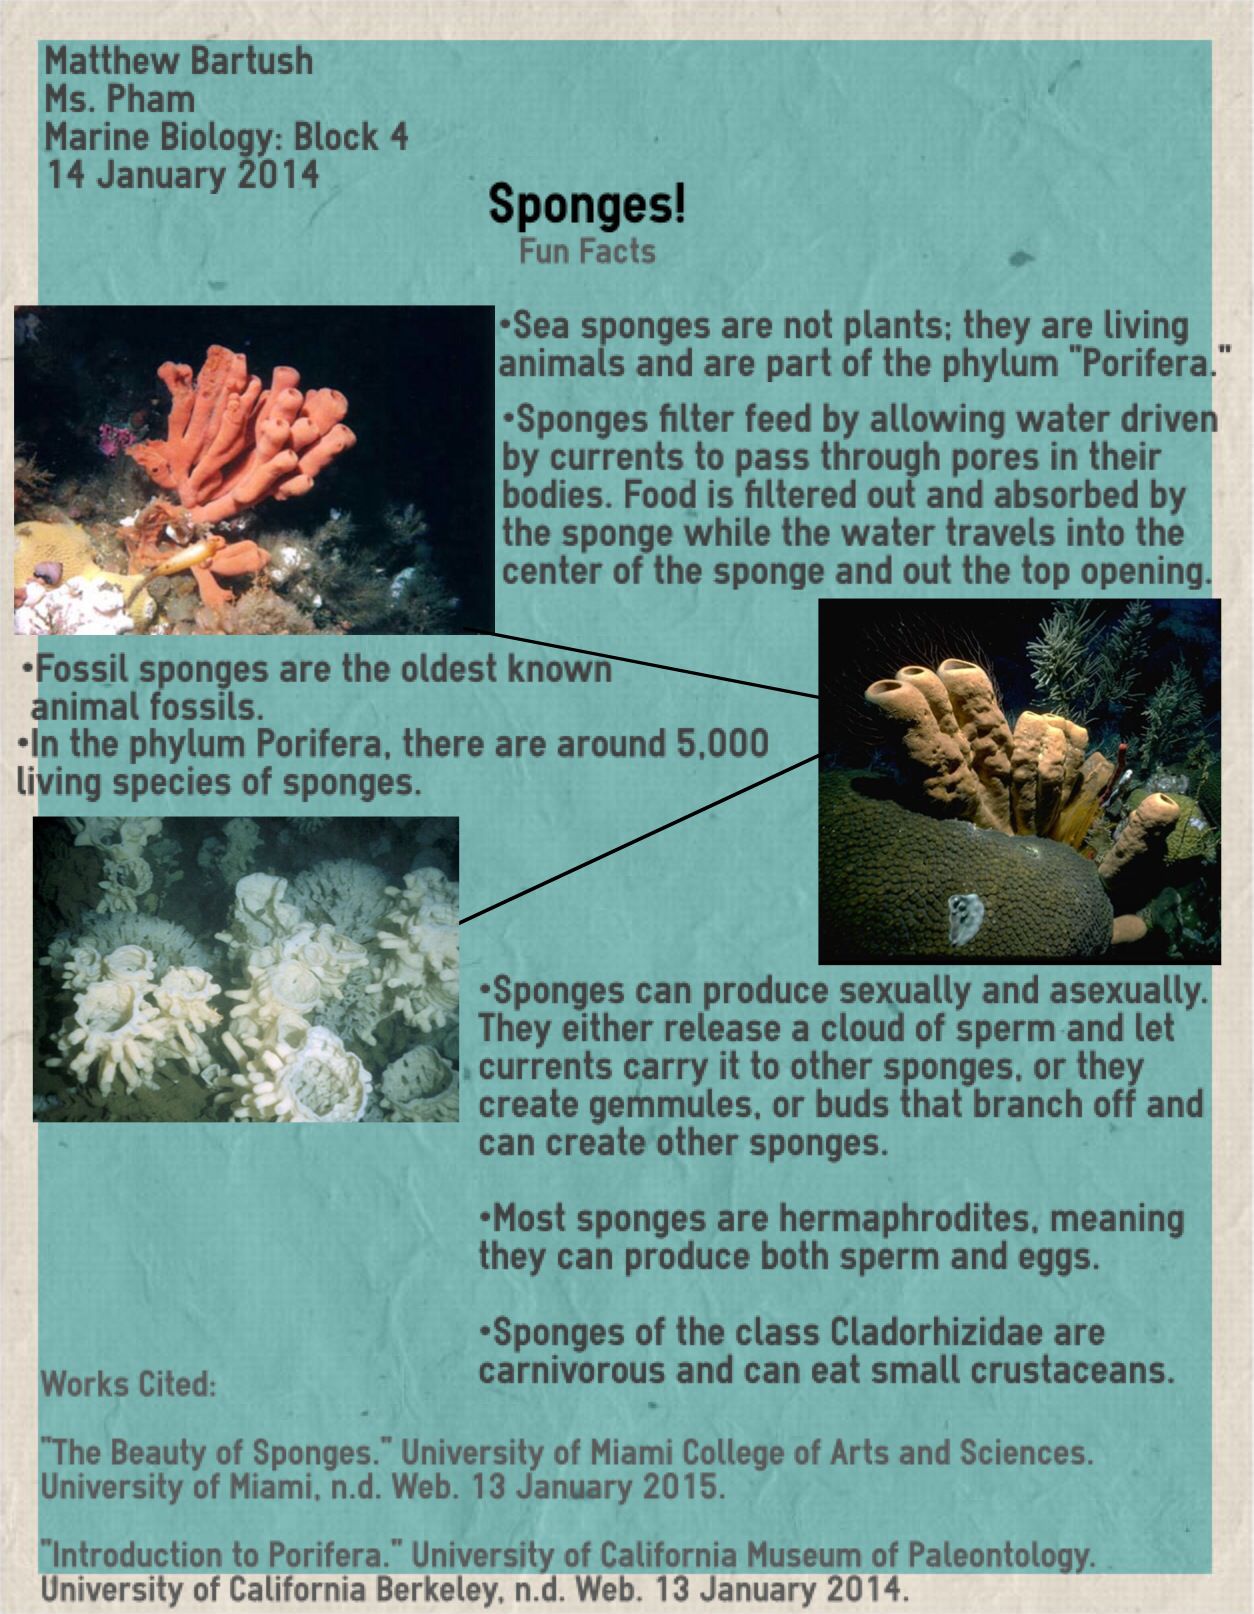 What are 3 facts about sponges?